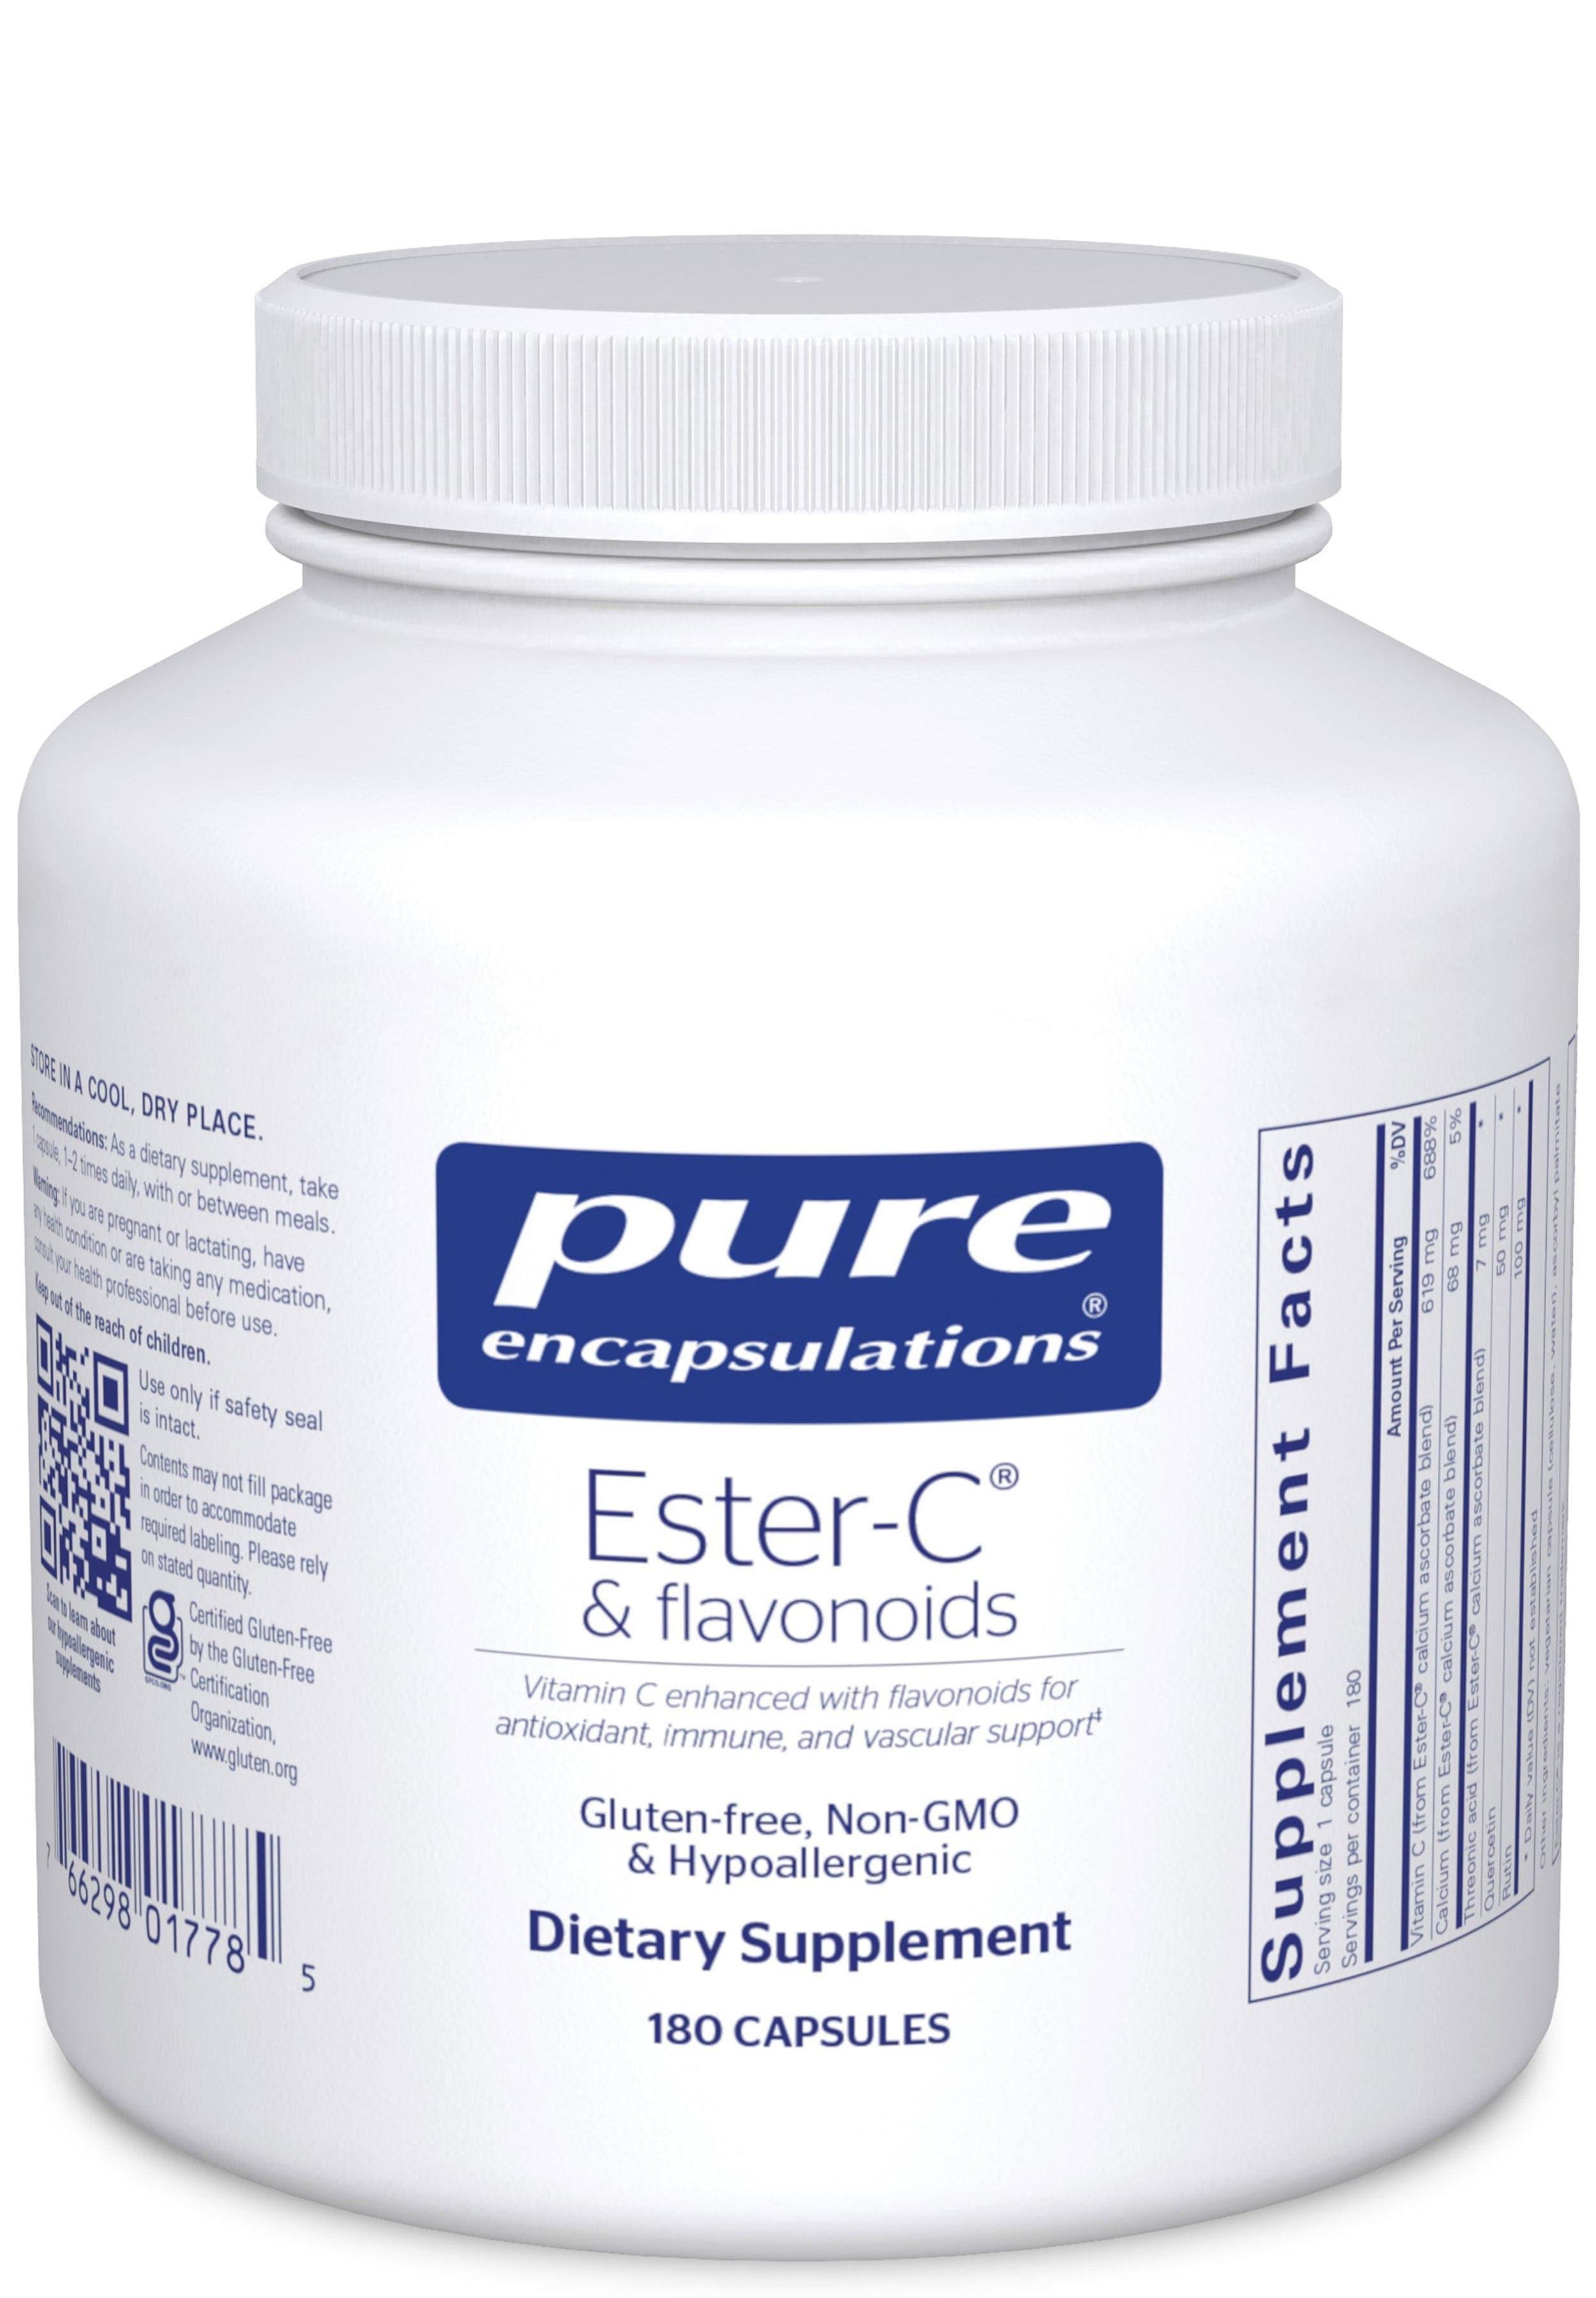 Pure Encapsulations Ester-C and Flavonoids (Formerly Essential-C and Flavonoids)